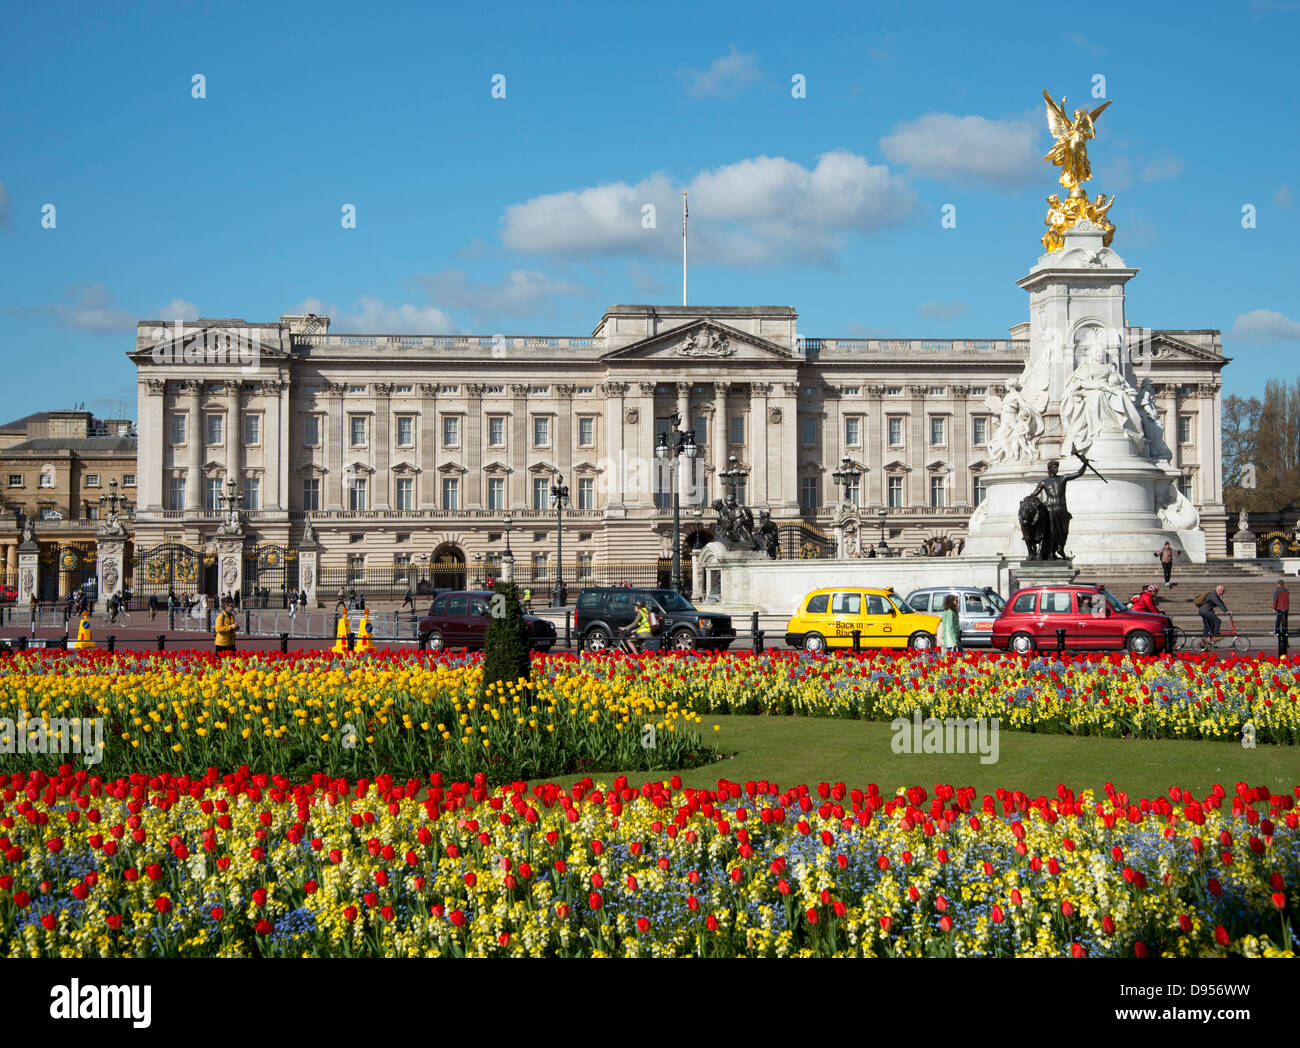 Red and yellow tulips and taxis in front of Buckingham Palace in April. London, UK Stock Photo